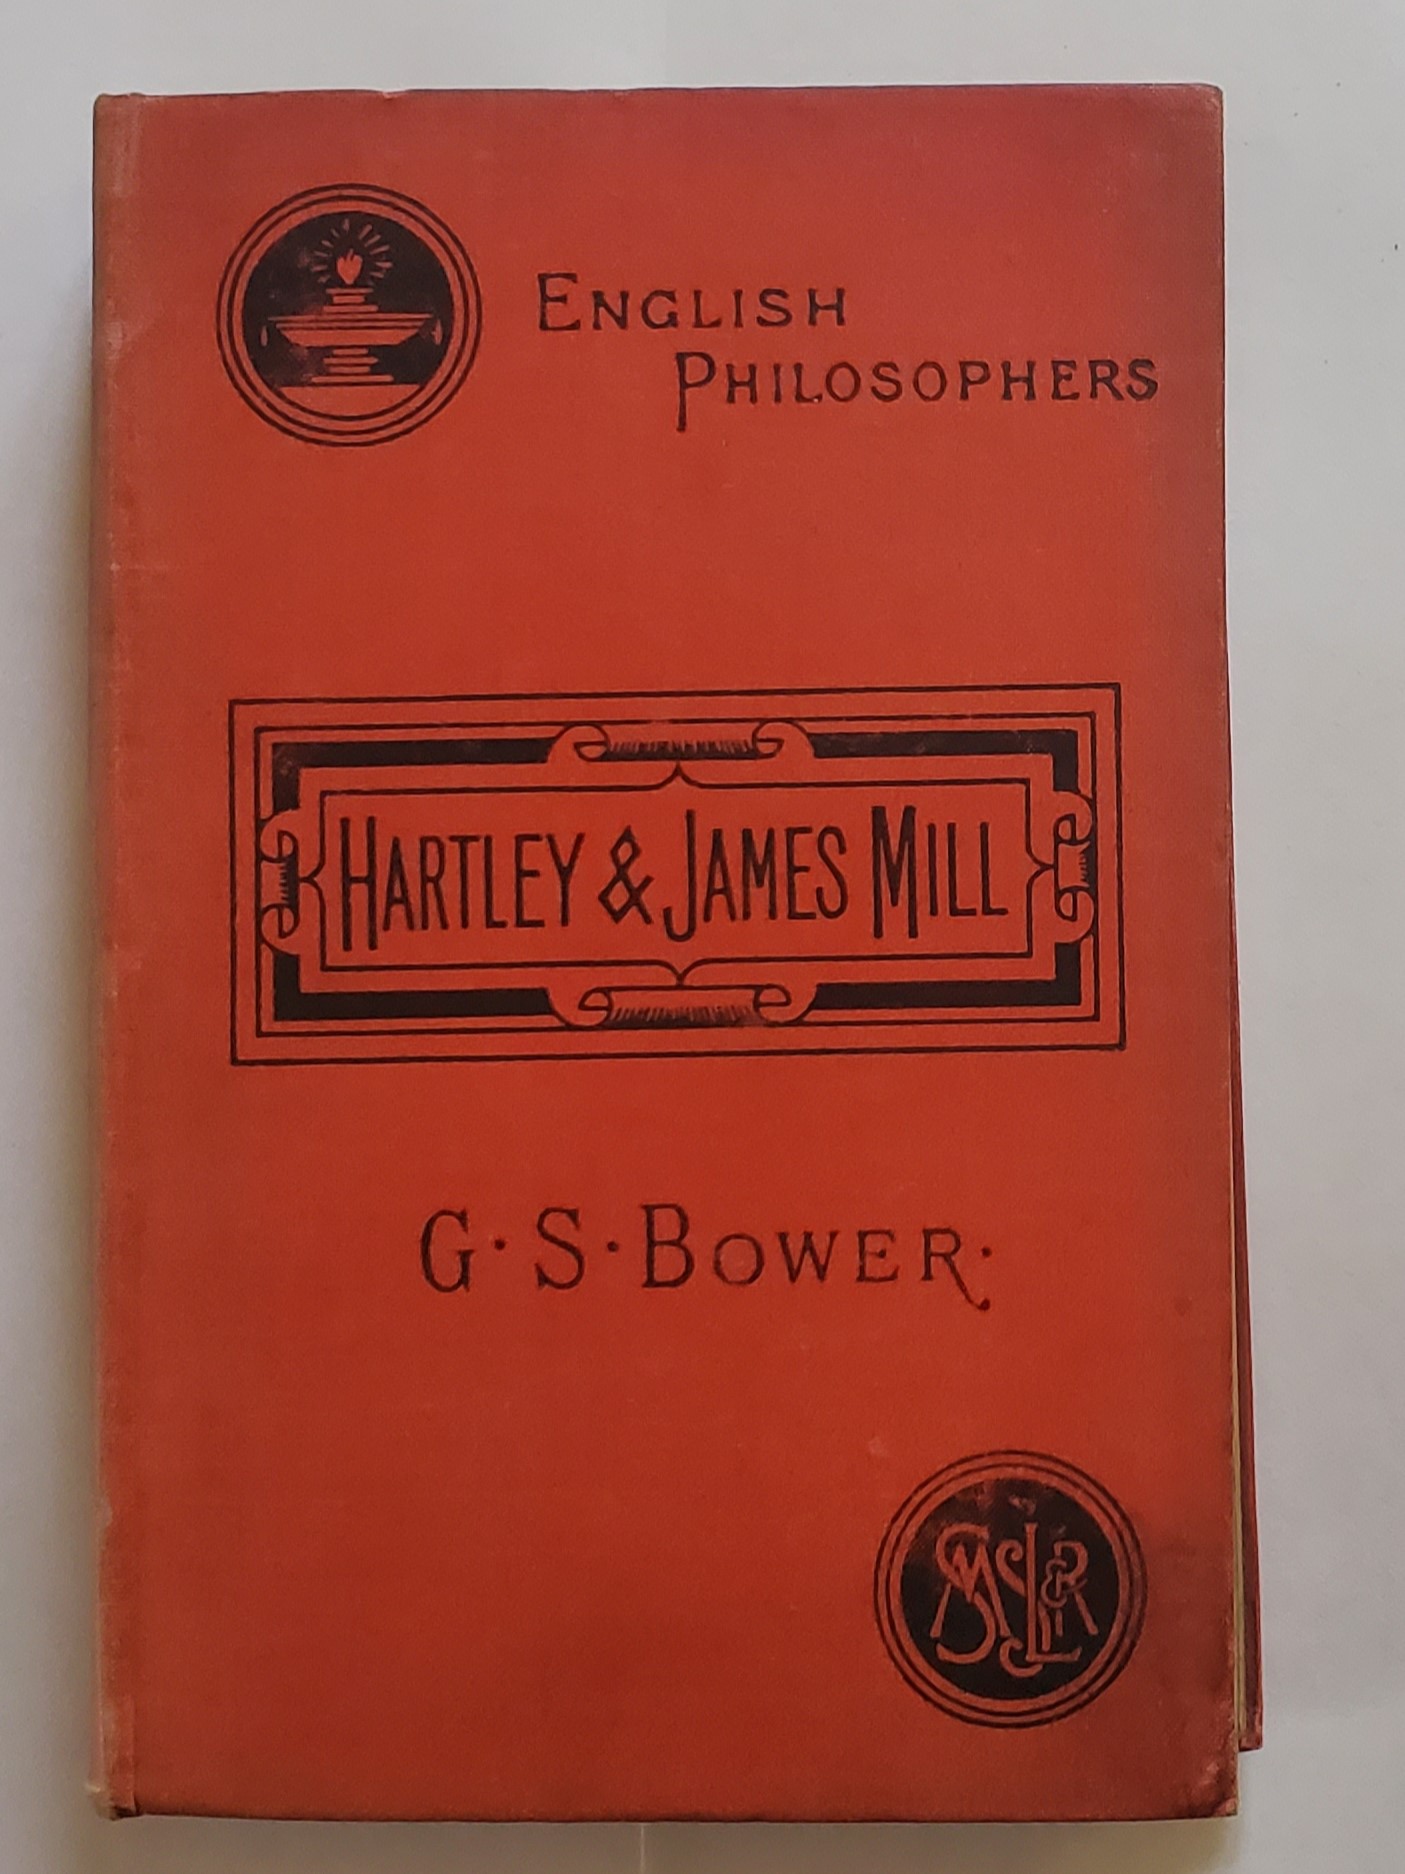 George Spencer BOWER. English Philosophers. Hartley and James Mill